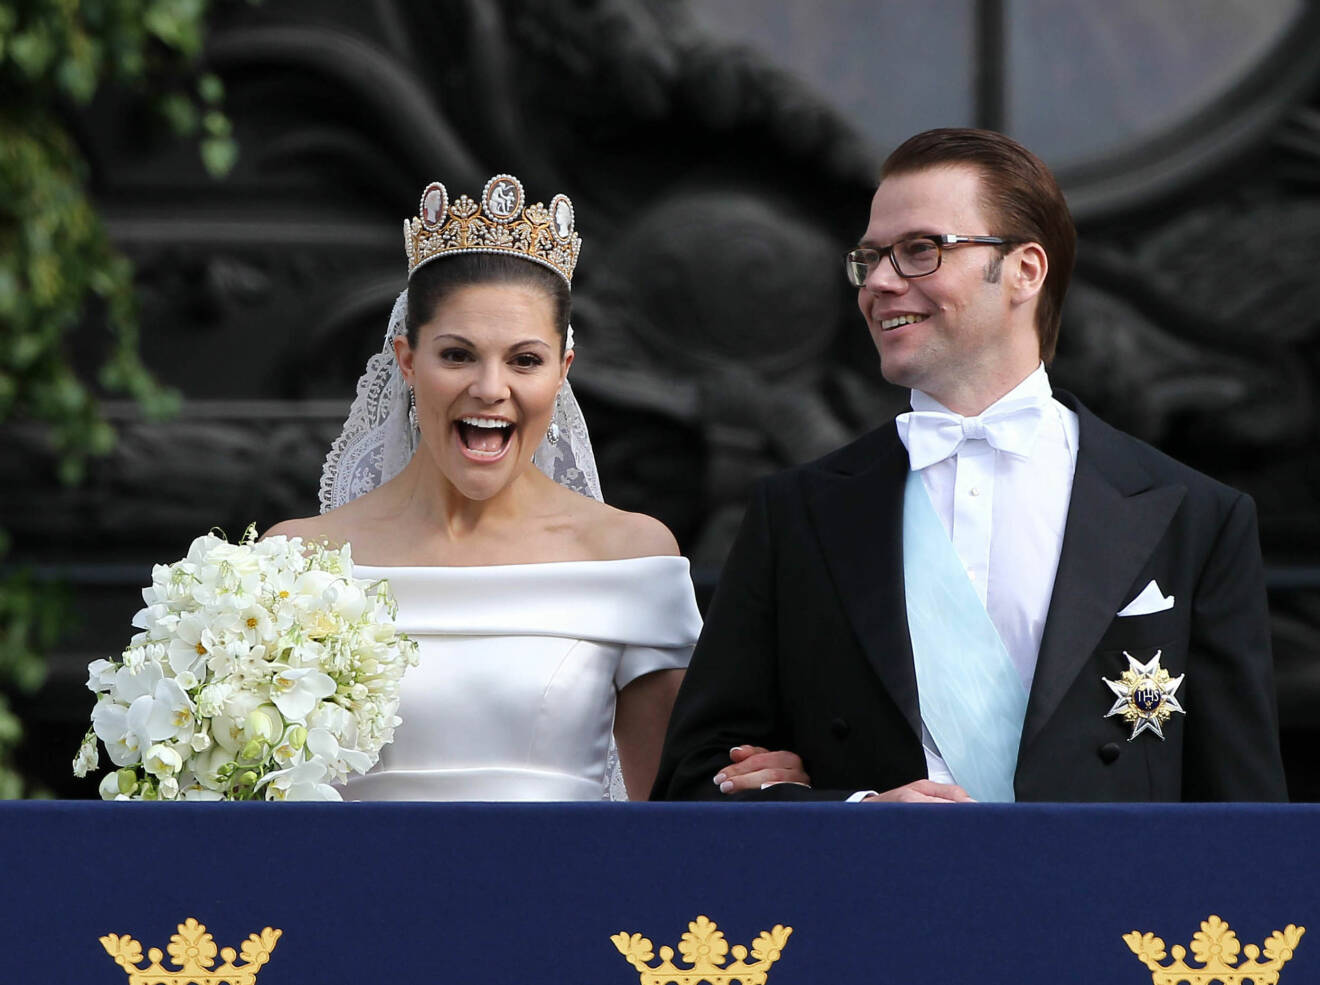 Crown Princess Victoria and Daniel westling's wedding at Royal Palace in Stockholm.